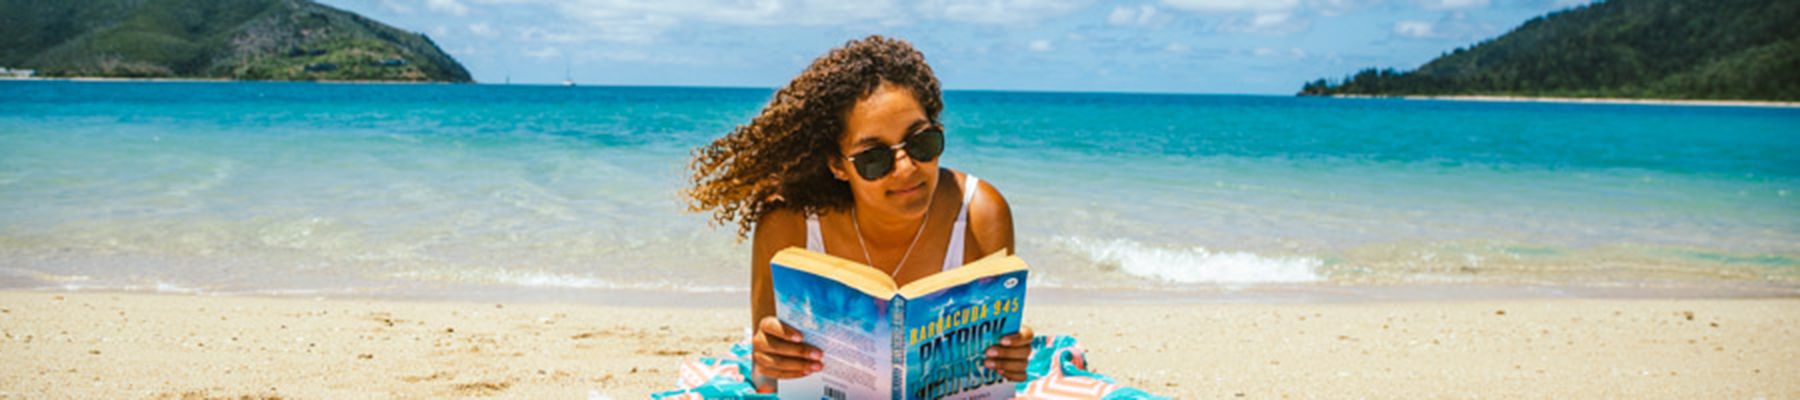 Girl reading a book with sunglasses on the beach